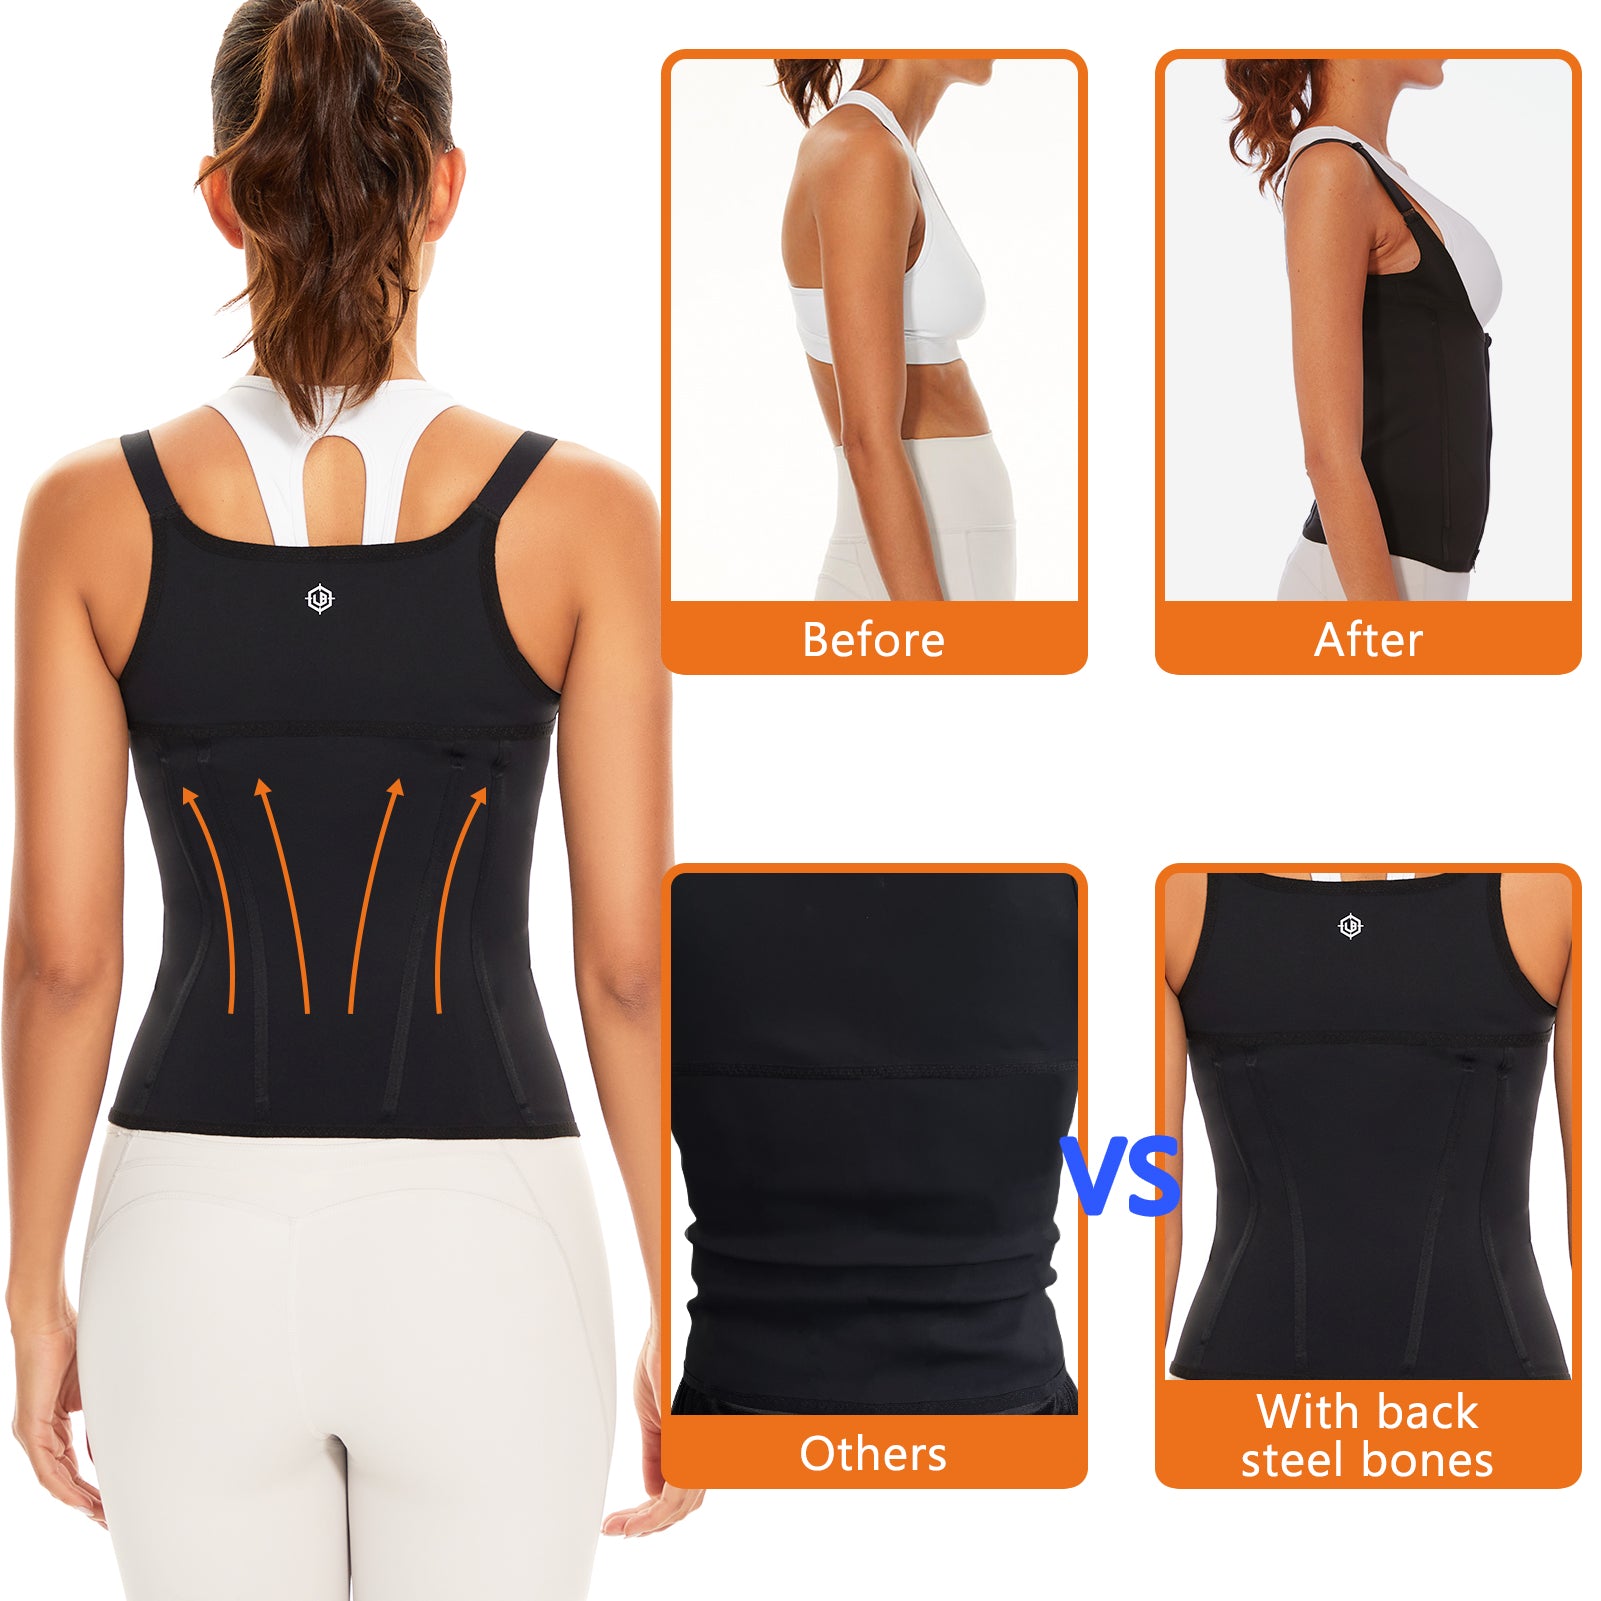 Buy Waist Trimmer Belt Wholesale From Experienced Suppliers 